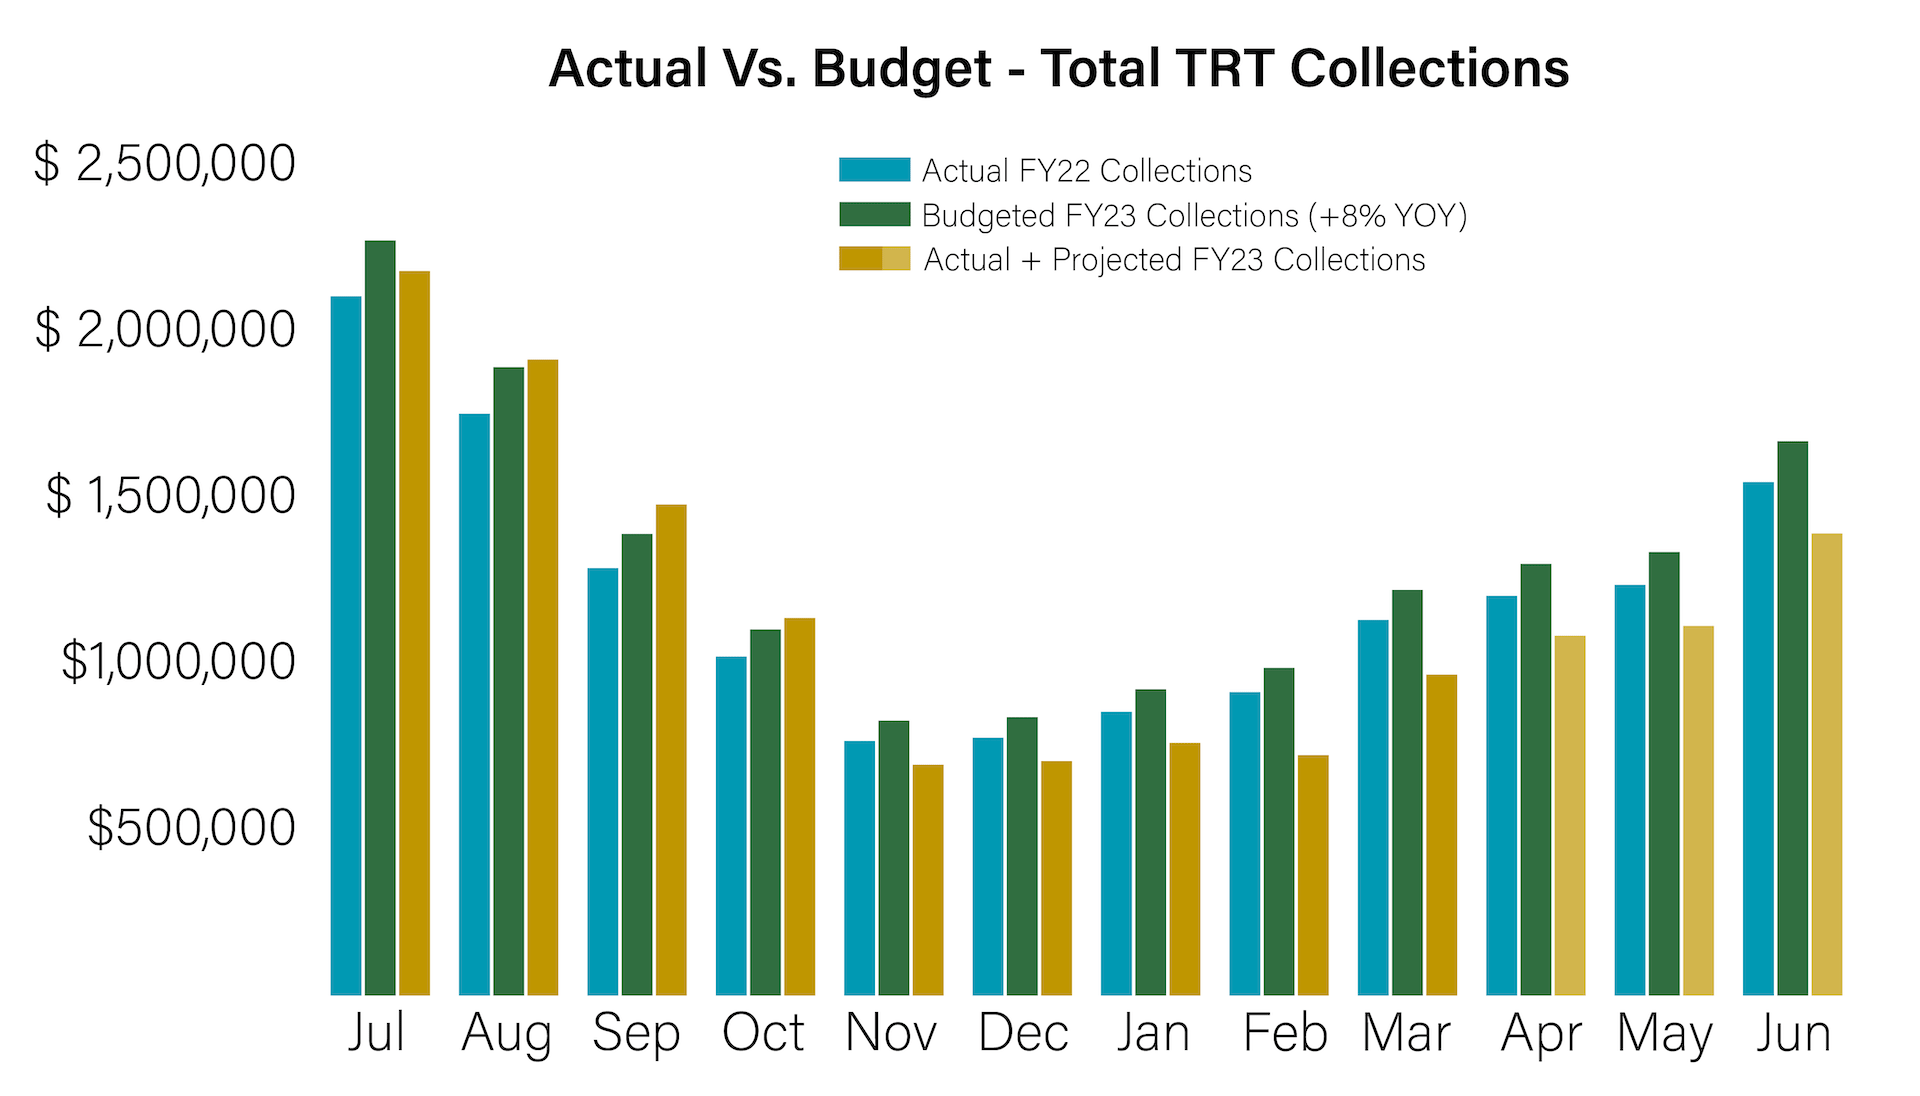 TRT collections, actual vs budget